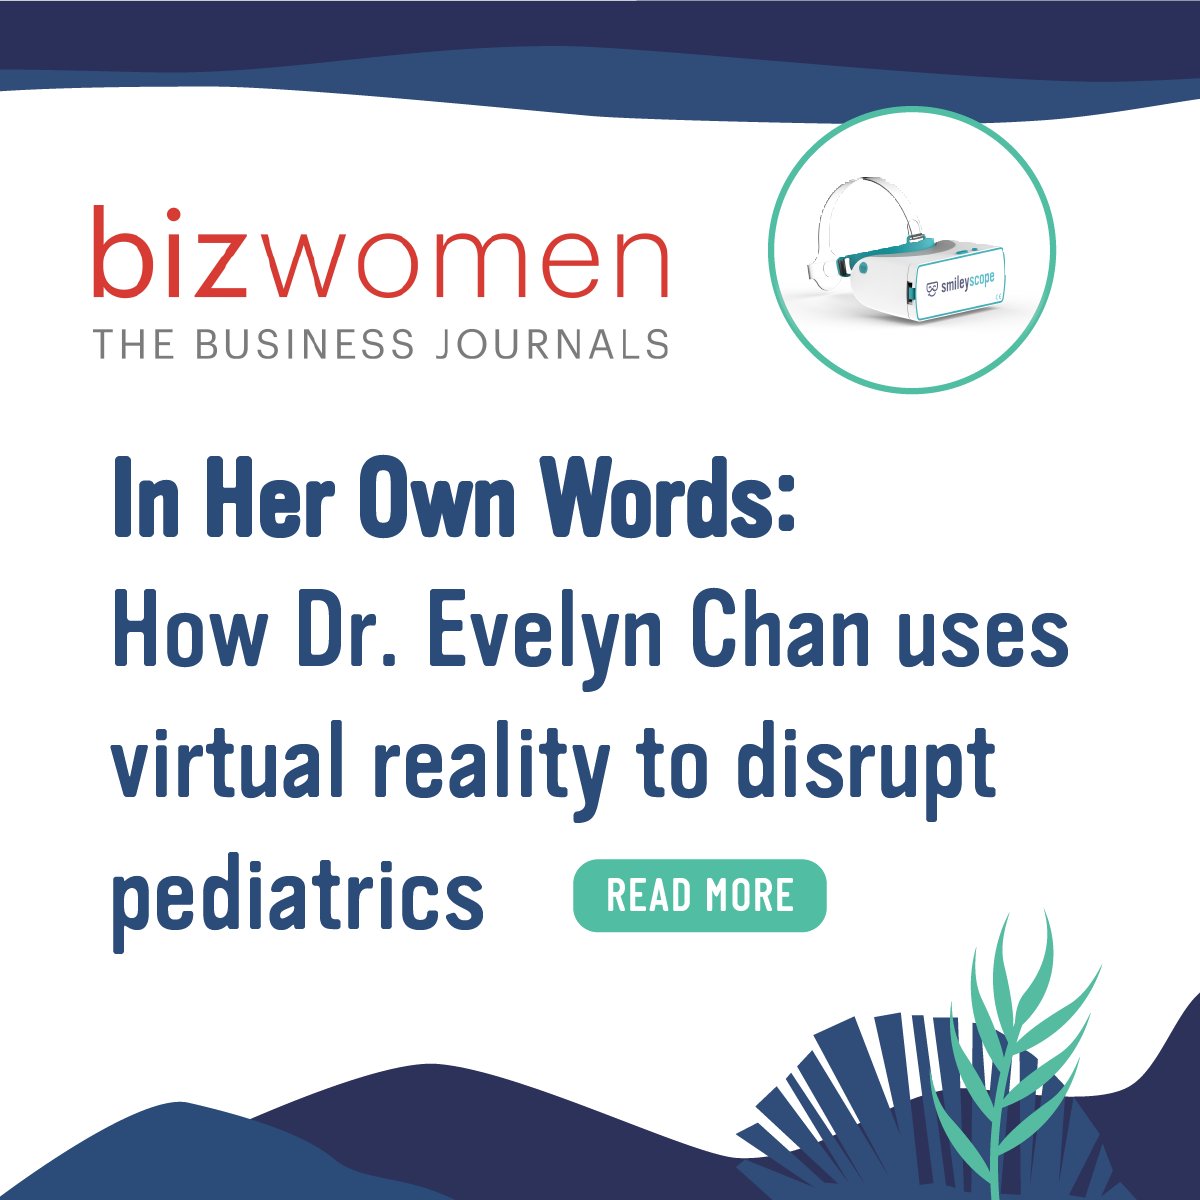 On @BizWomen, Smileyscope CEO and co-founder, Dr. Evelyn Chan, writes, 'Through my experiences as a healthcare entrepreneur, I've come to understand how entrepreneurship can drive innovation in healthcare and improve patient outcomes.' Read more here: shorturl.at/krIT1